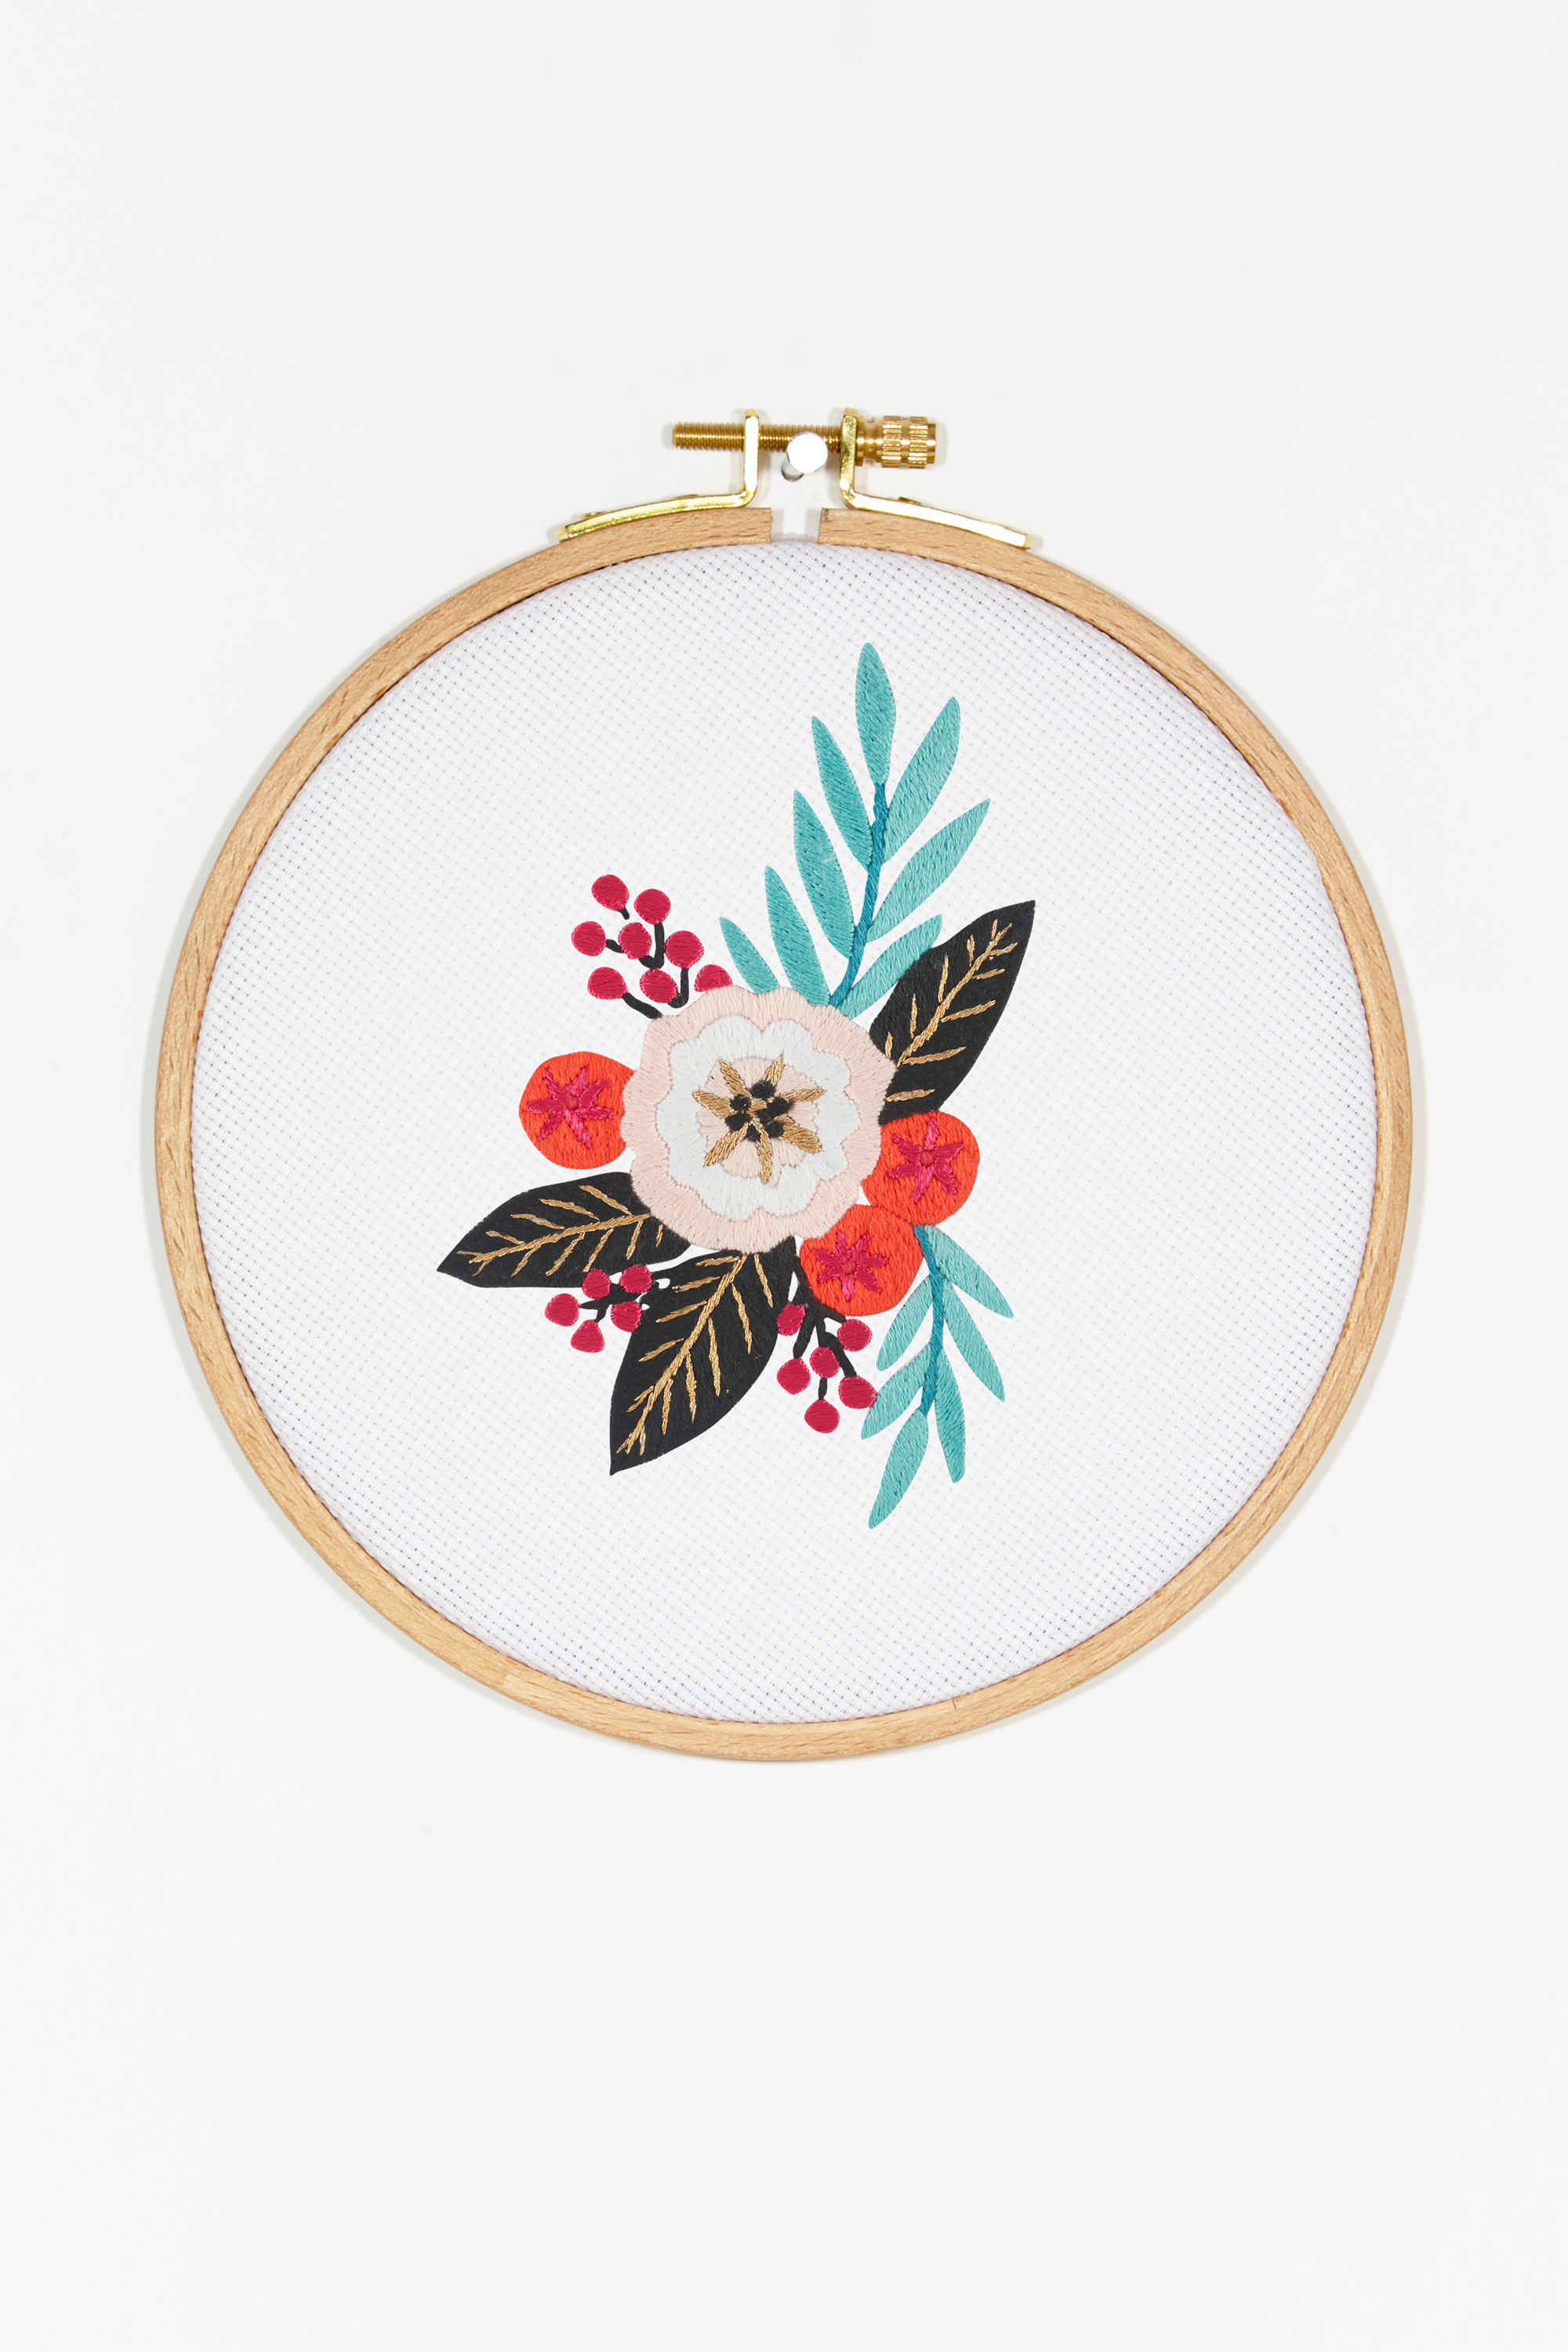 Dmc Embroidery Patterns Summer Blossom Pattern Free Embroidery Patterns Dmc